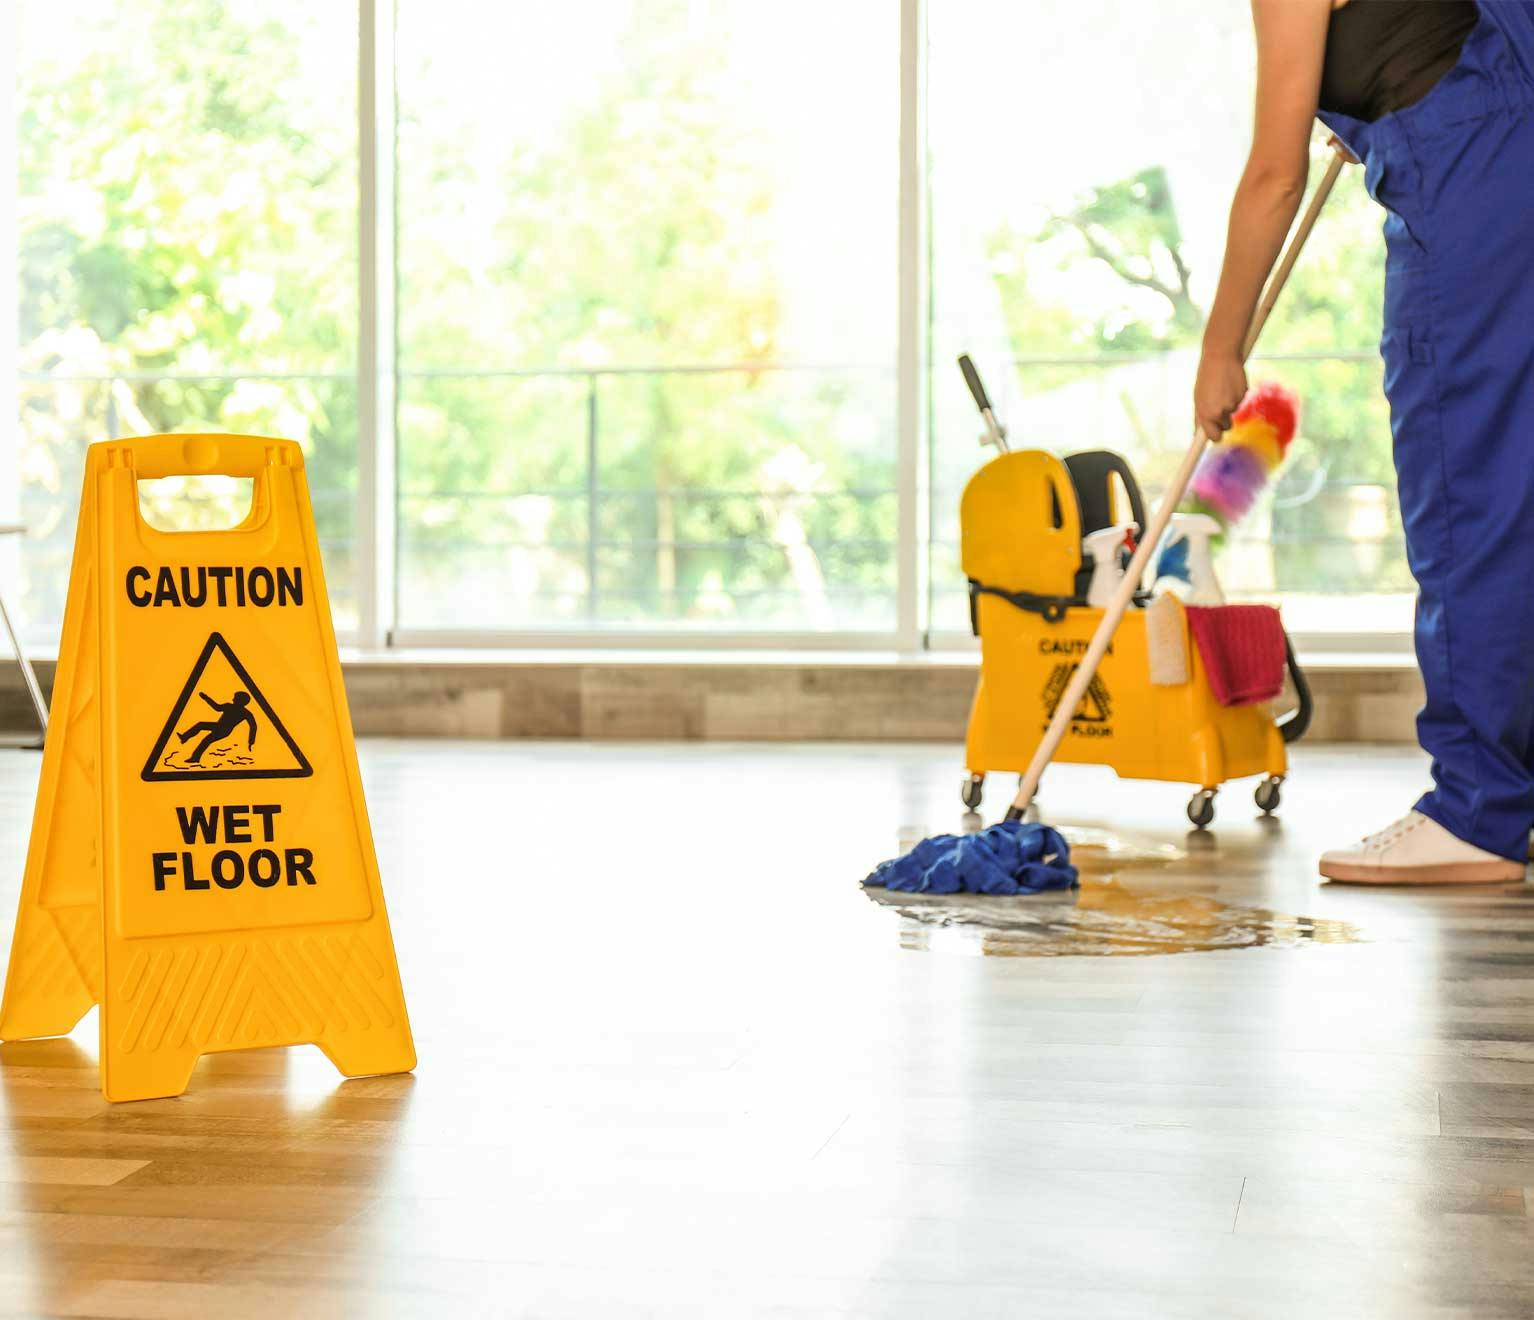 caution sign is posted warning others of a wet floor while a person mops_responsive